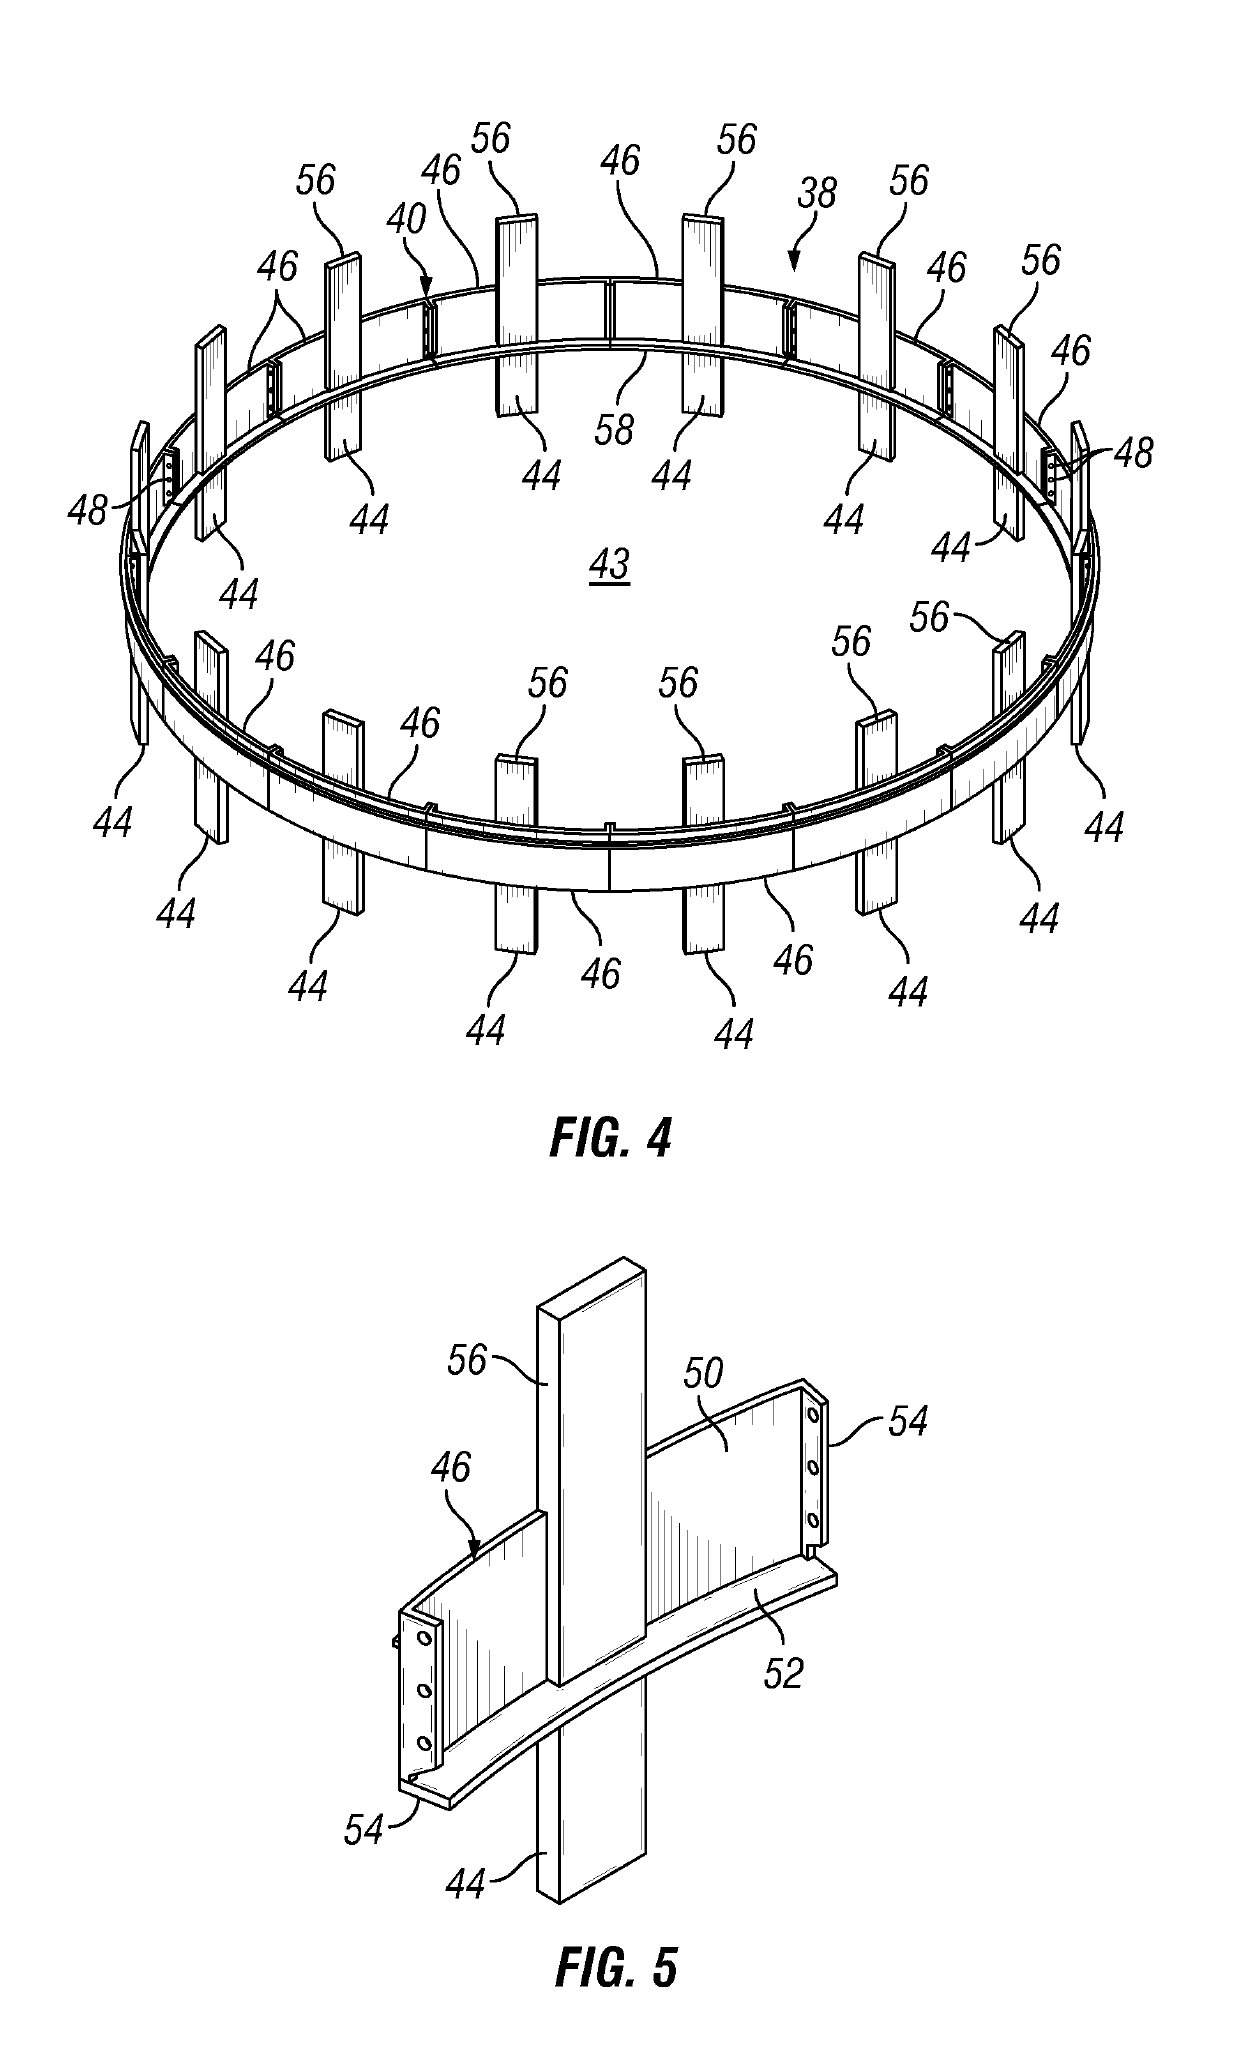 Tray support inserts for chemical reactor vessels and methods of use